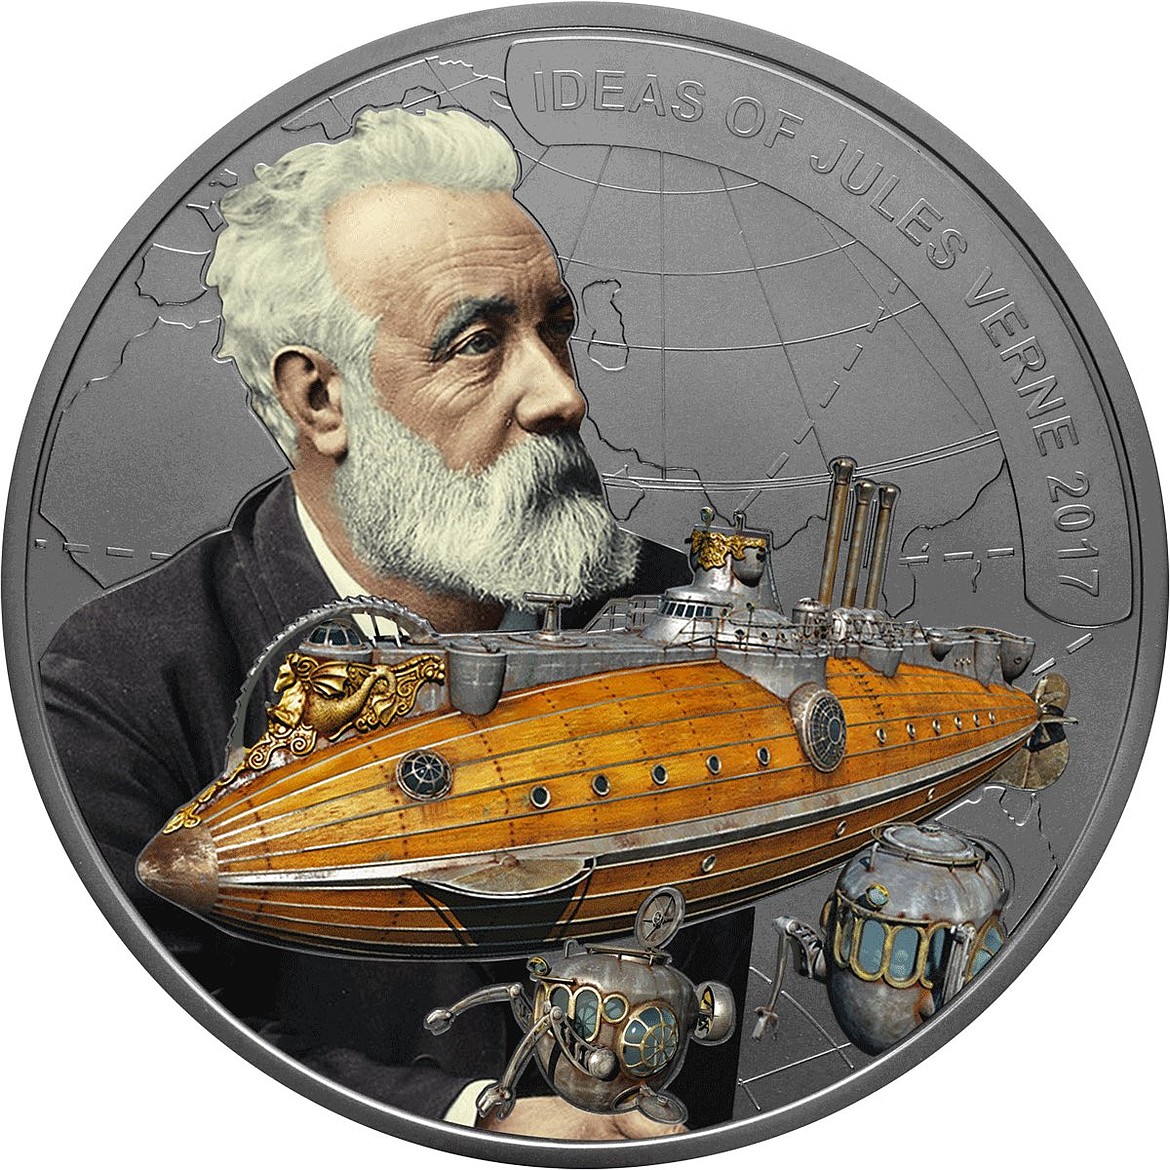 Coin depicting Jules Verne and his fictional submarine Nautilus.